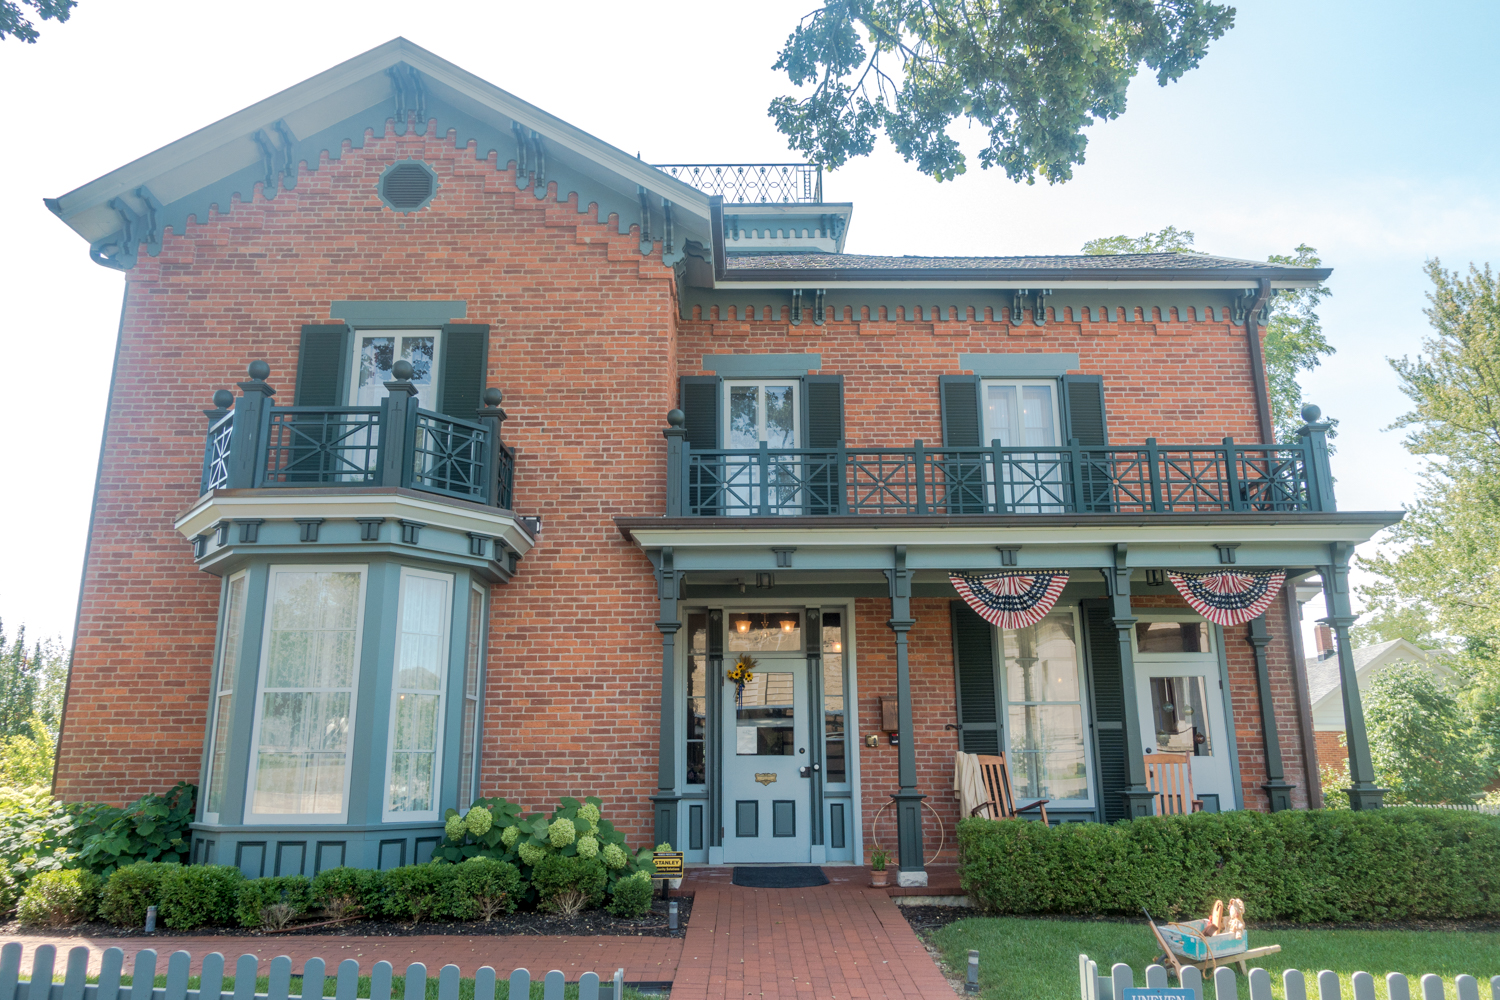 Travel Guide to Wabash, Indiana. What to see & do in this charming town. 